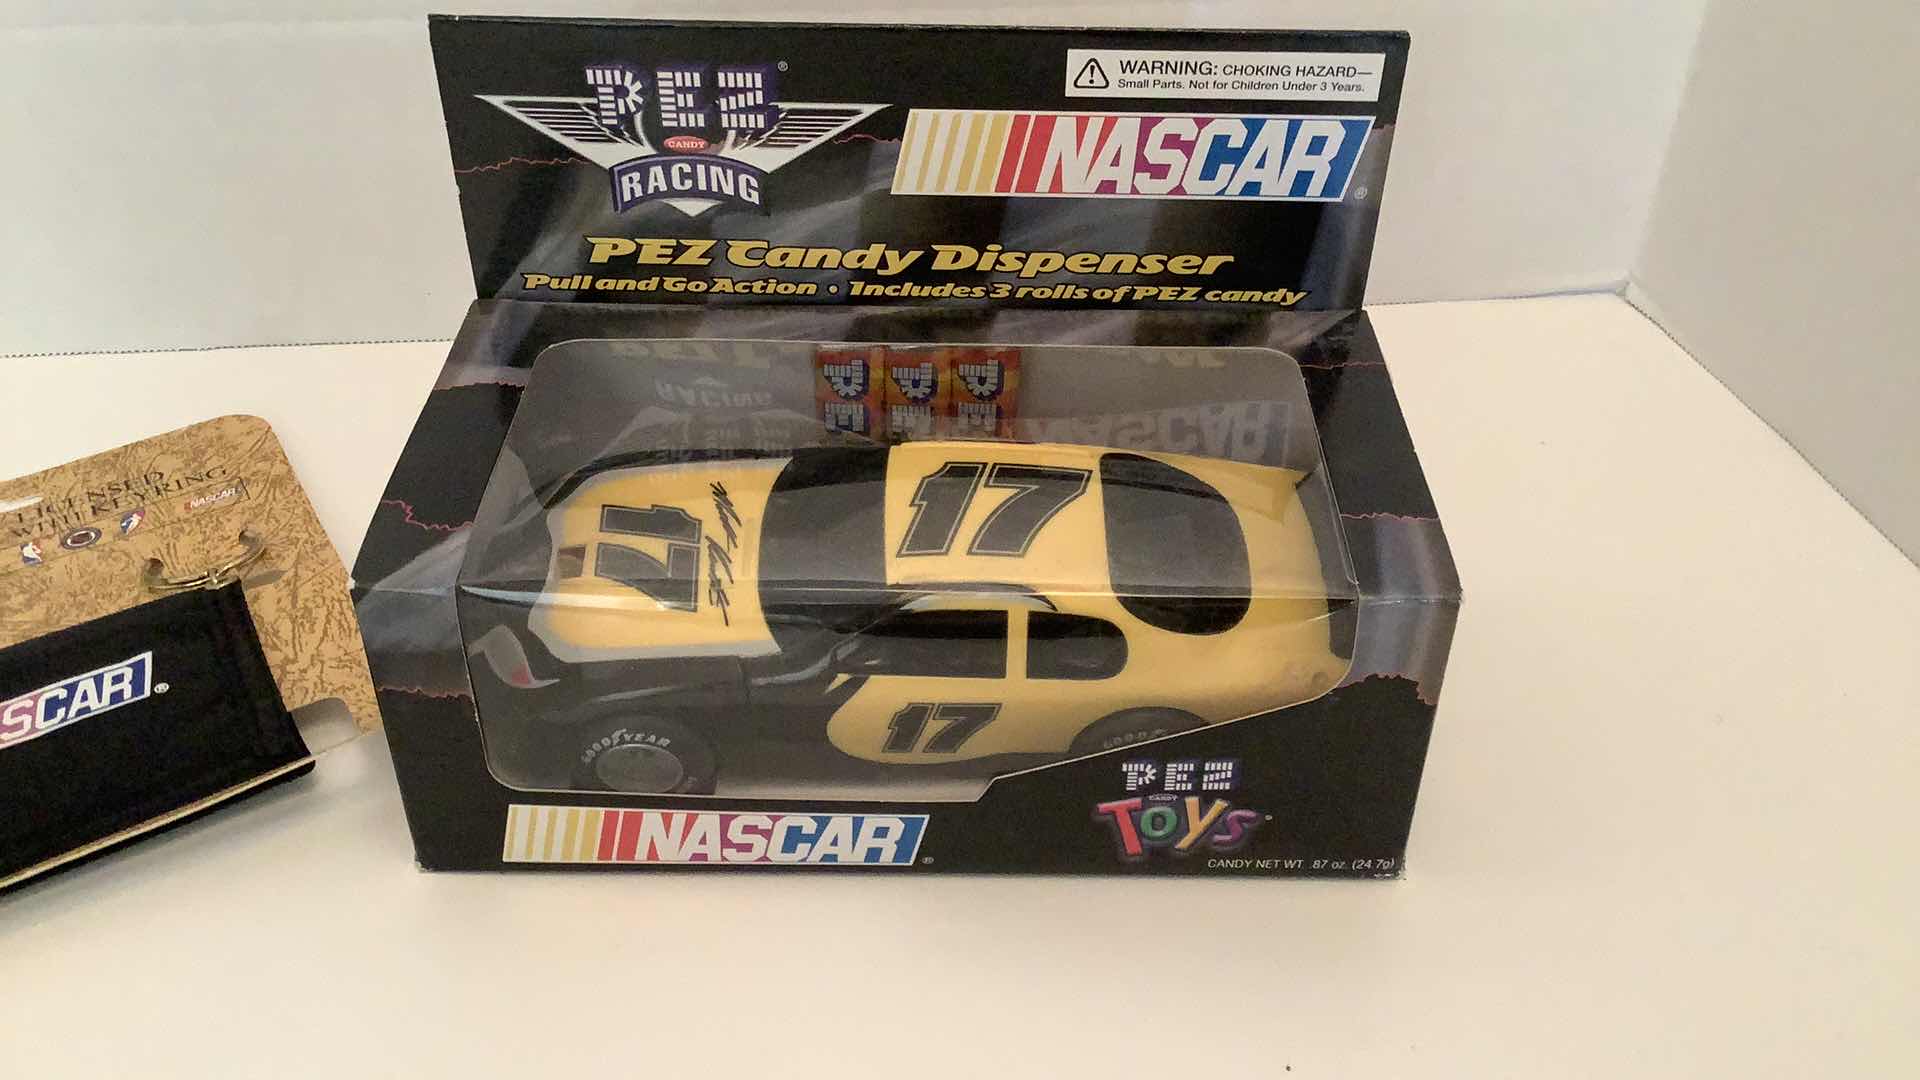 Photo 2 of NASCAR #17 PEZ CANDY DISPENSER AND CARD CASE